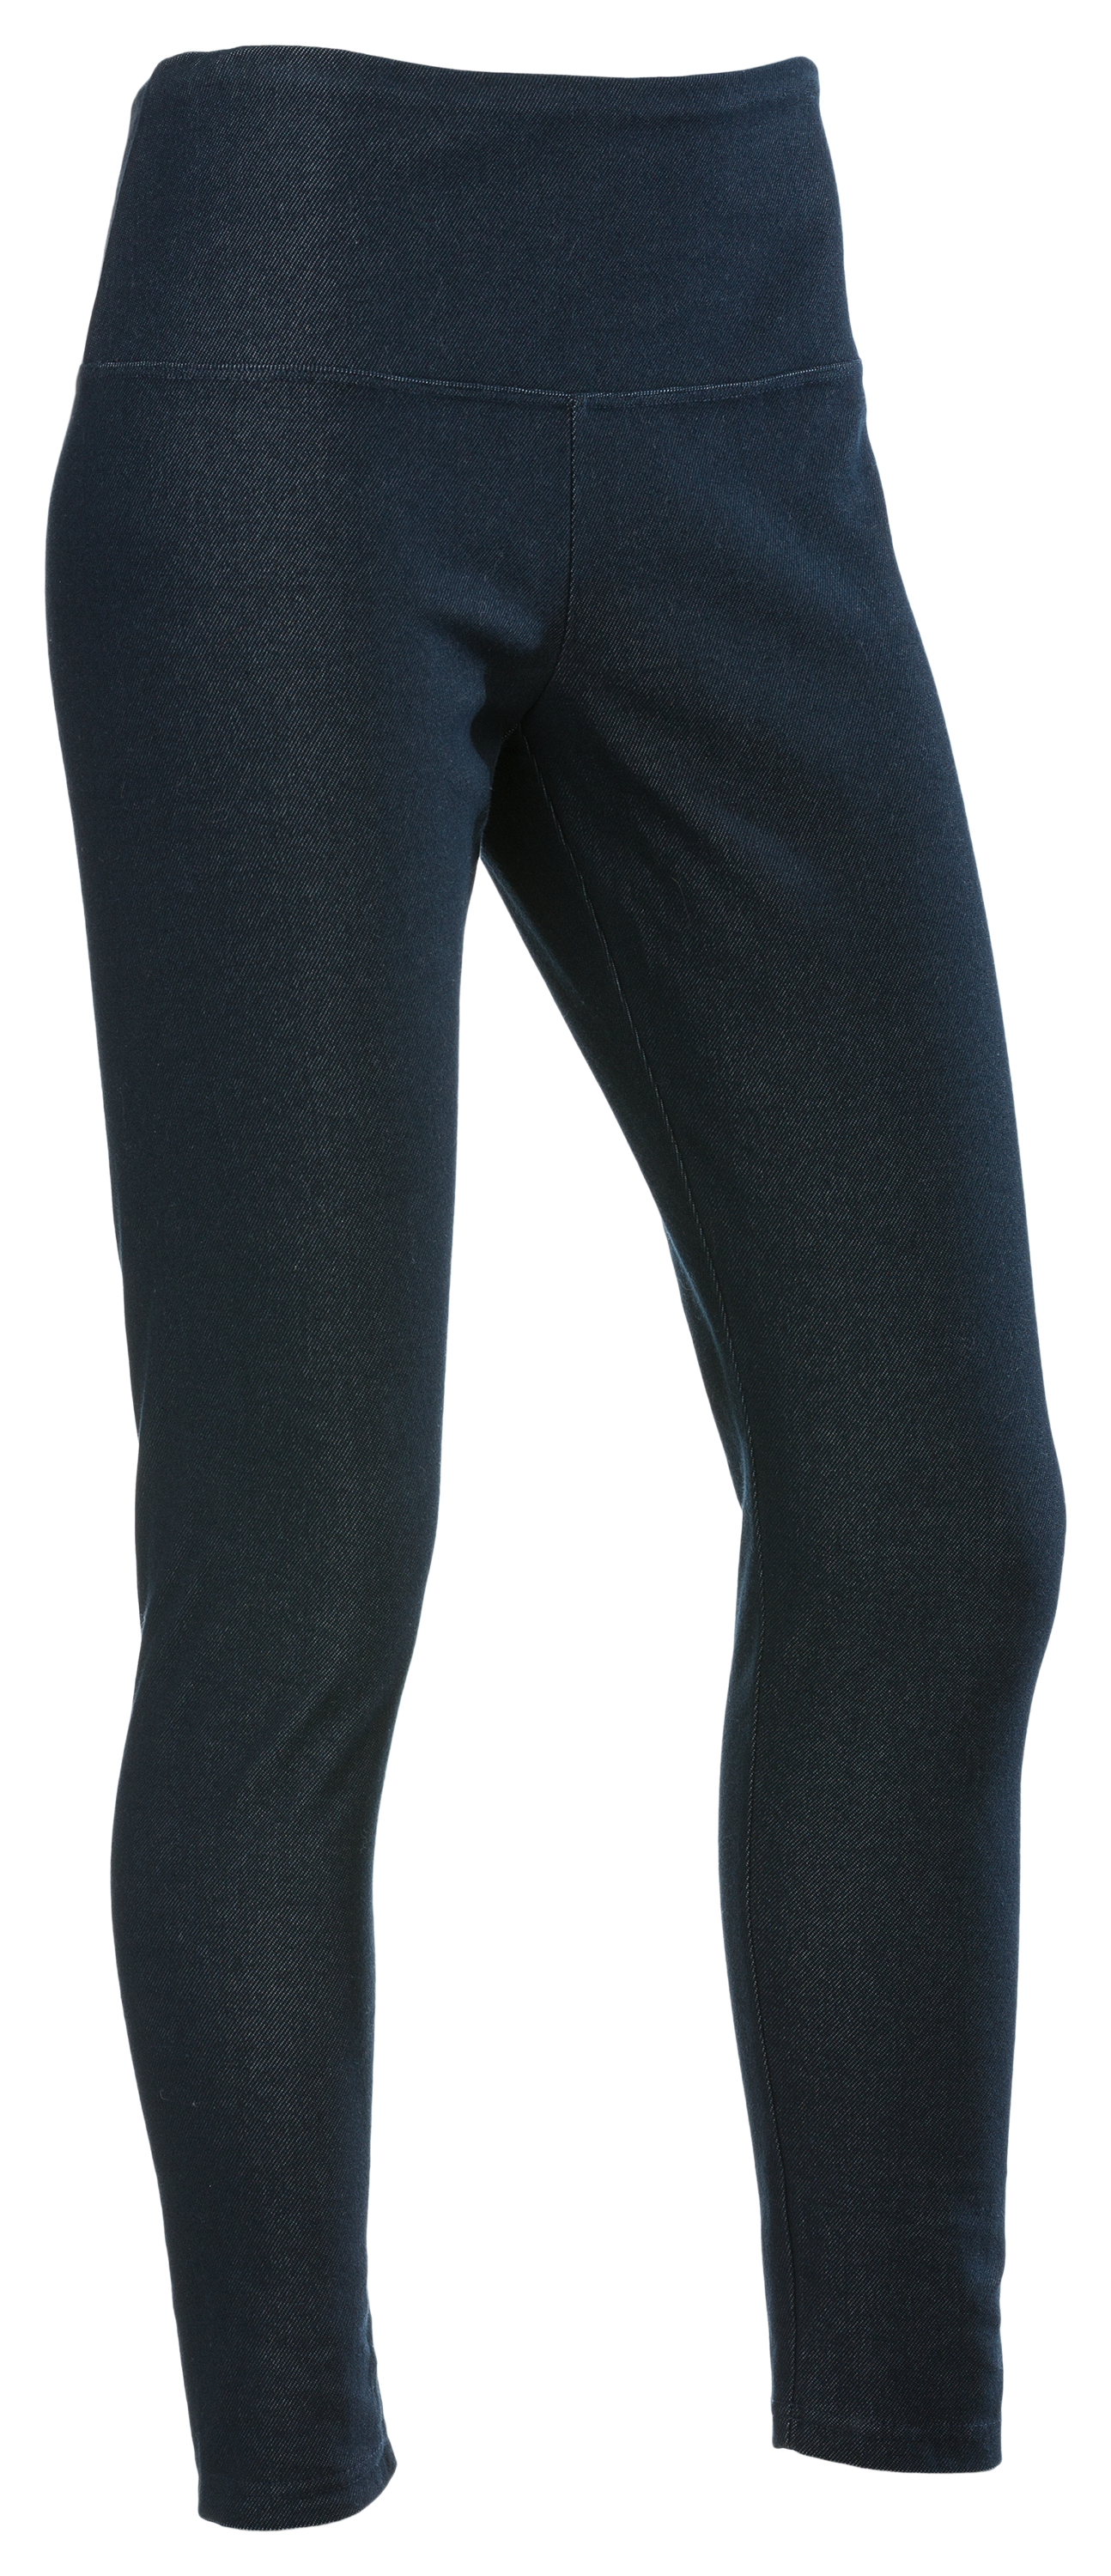 Natural Reflections Denim-Look Knit Leggings for Ladies | Bass Pro Shops